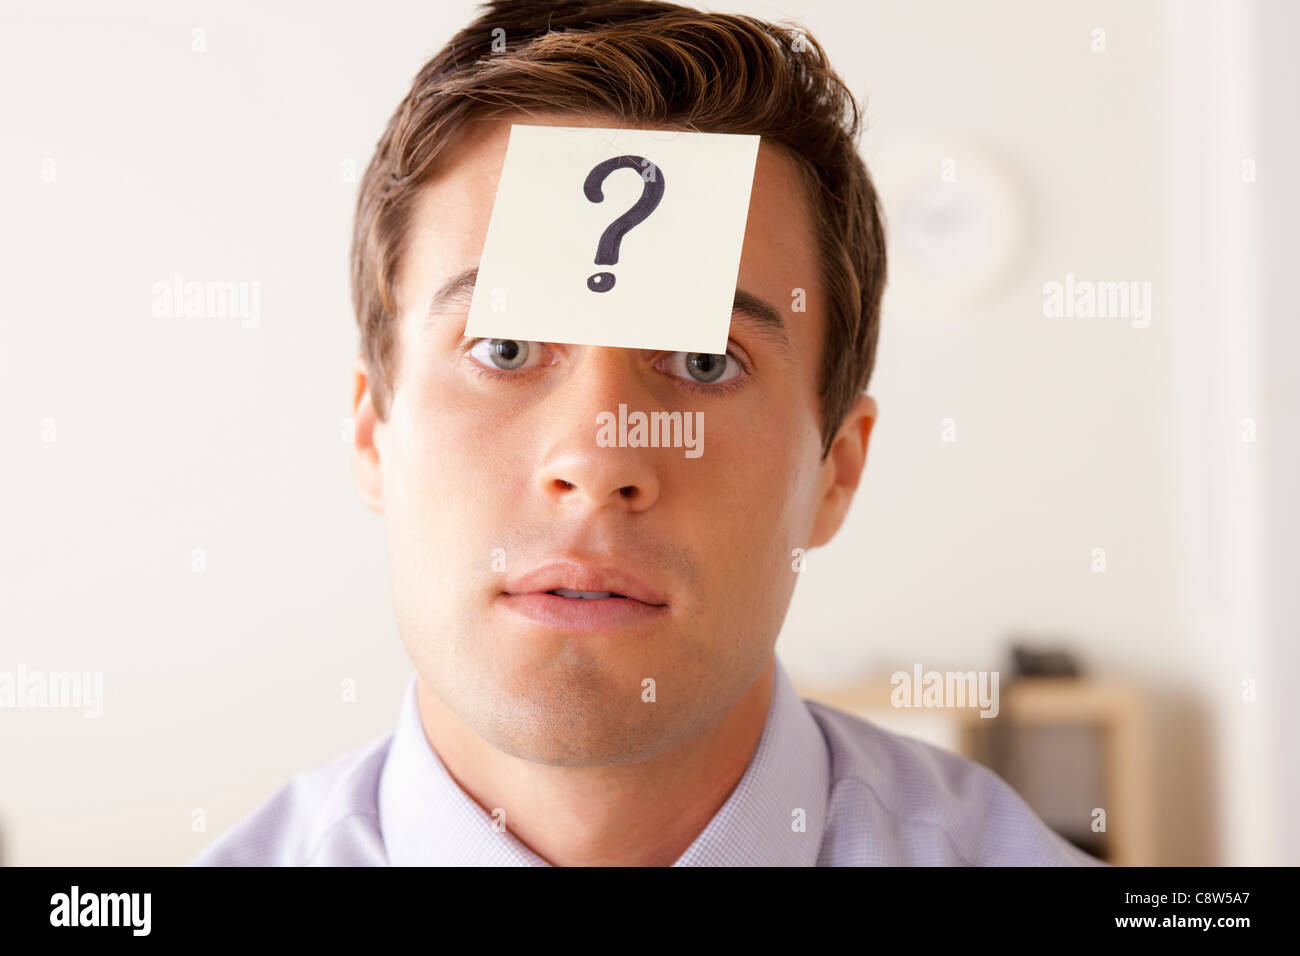 Portrait of businessman with adhesive note attached on forehead Stock Photo